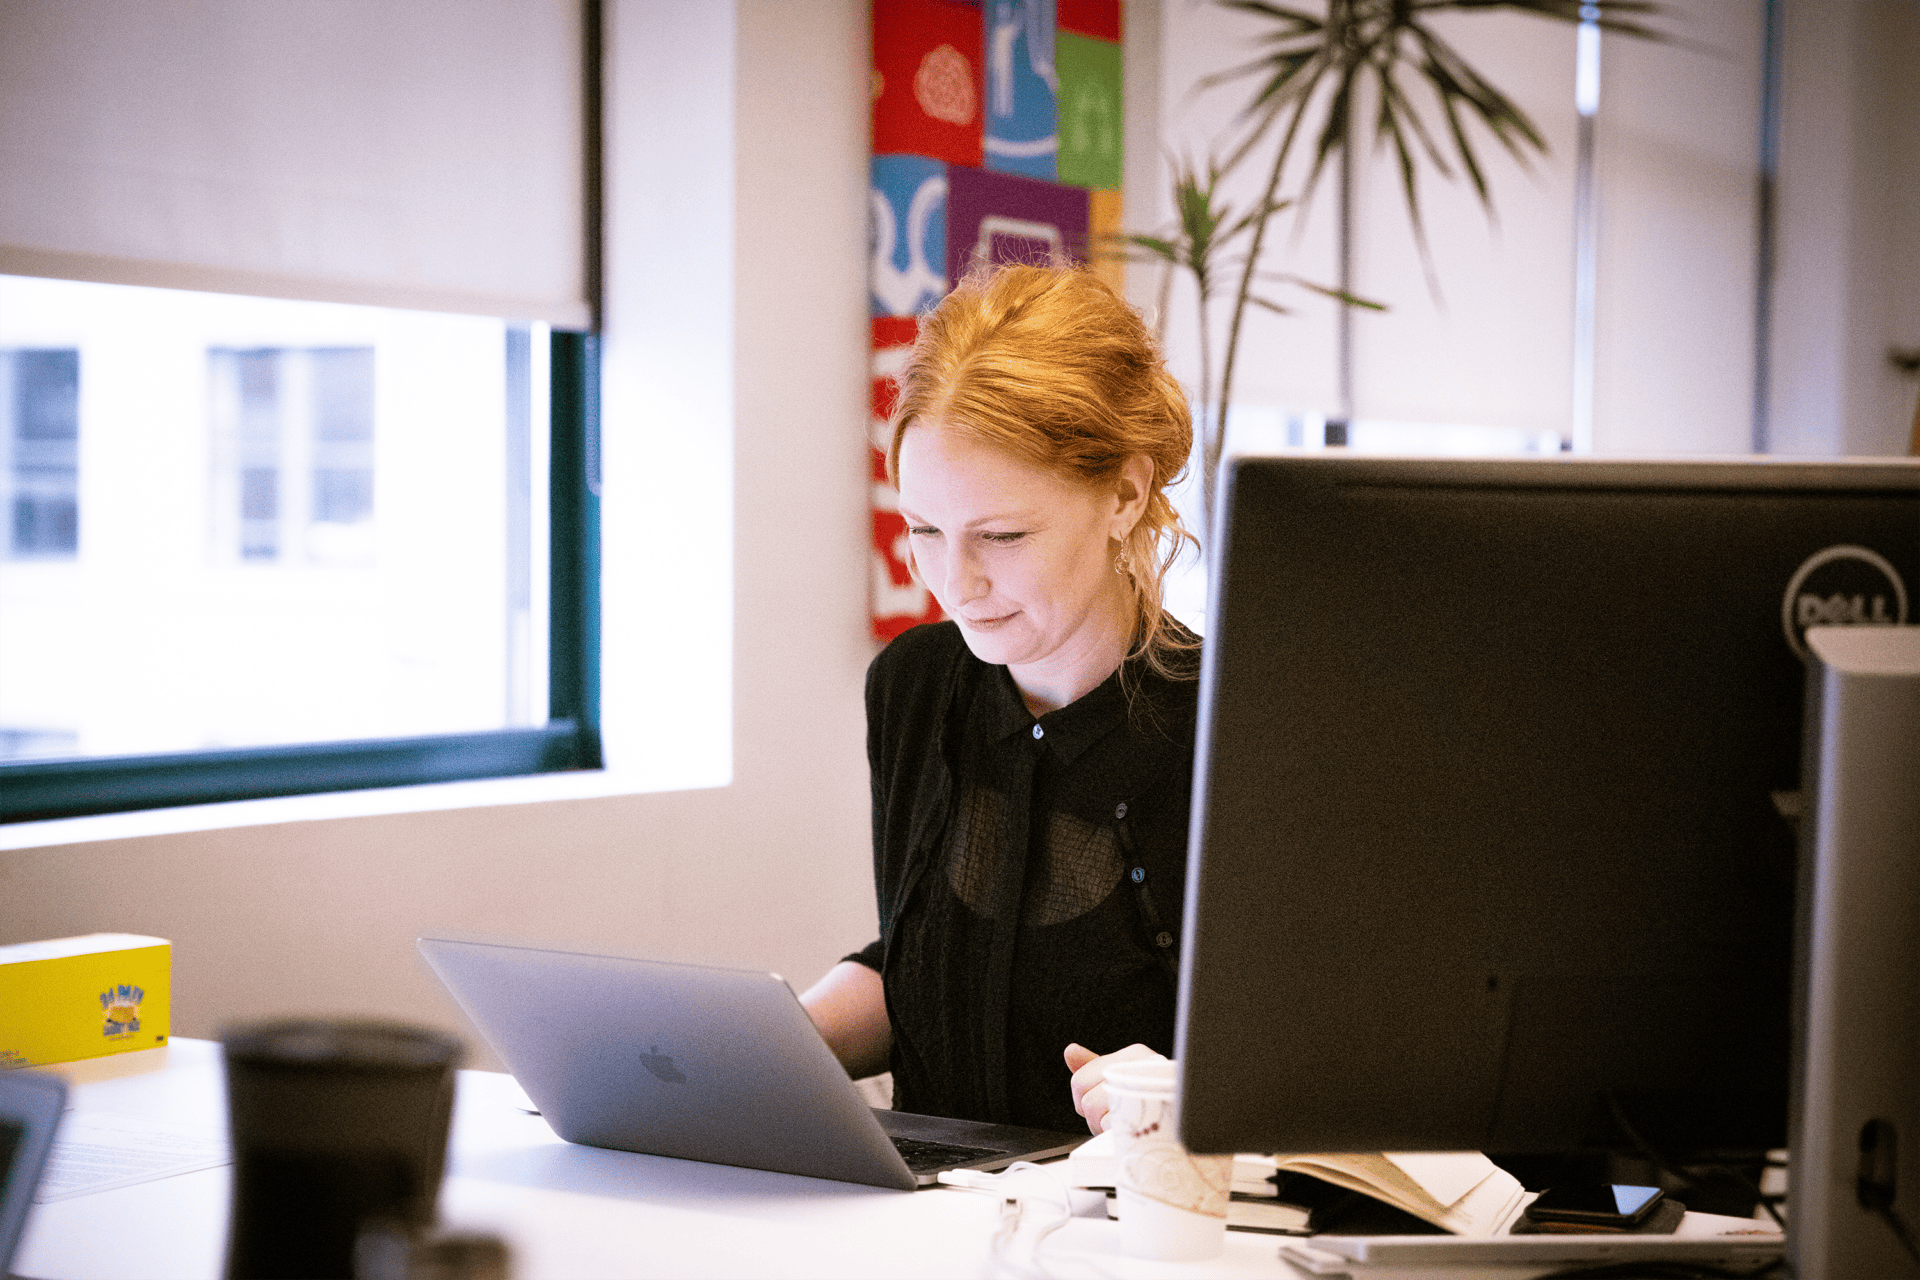 A woman with red hair working on a laptop at an office desk, with a desktop monitor beside her and posters advertising Amplify Tutoring services in the background.